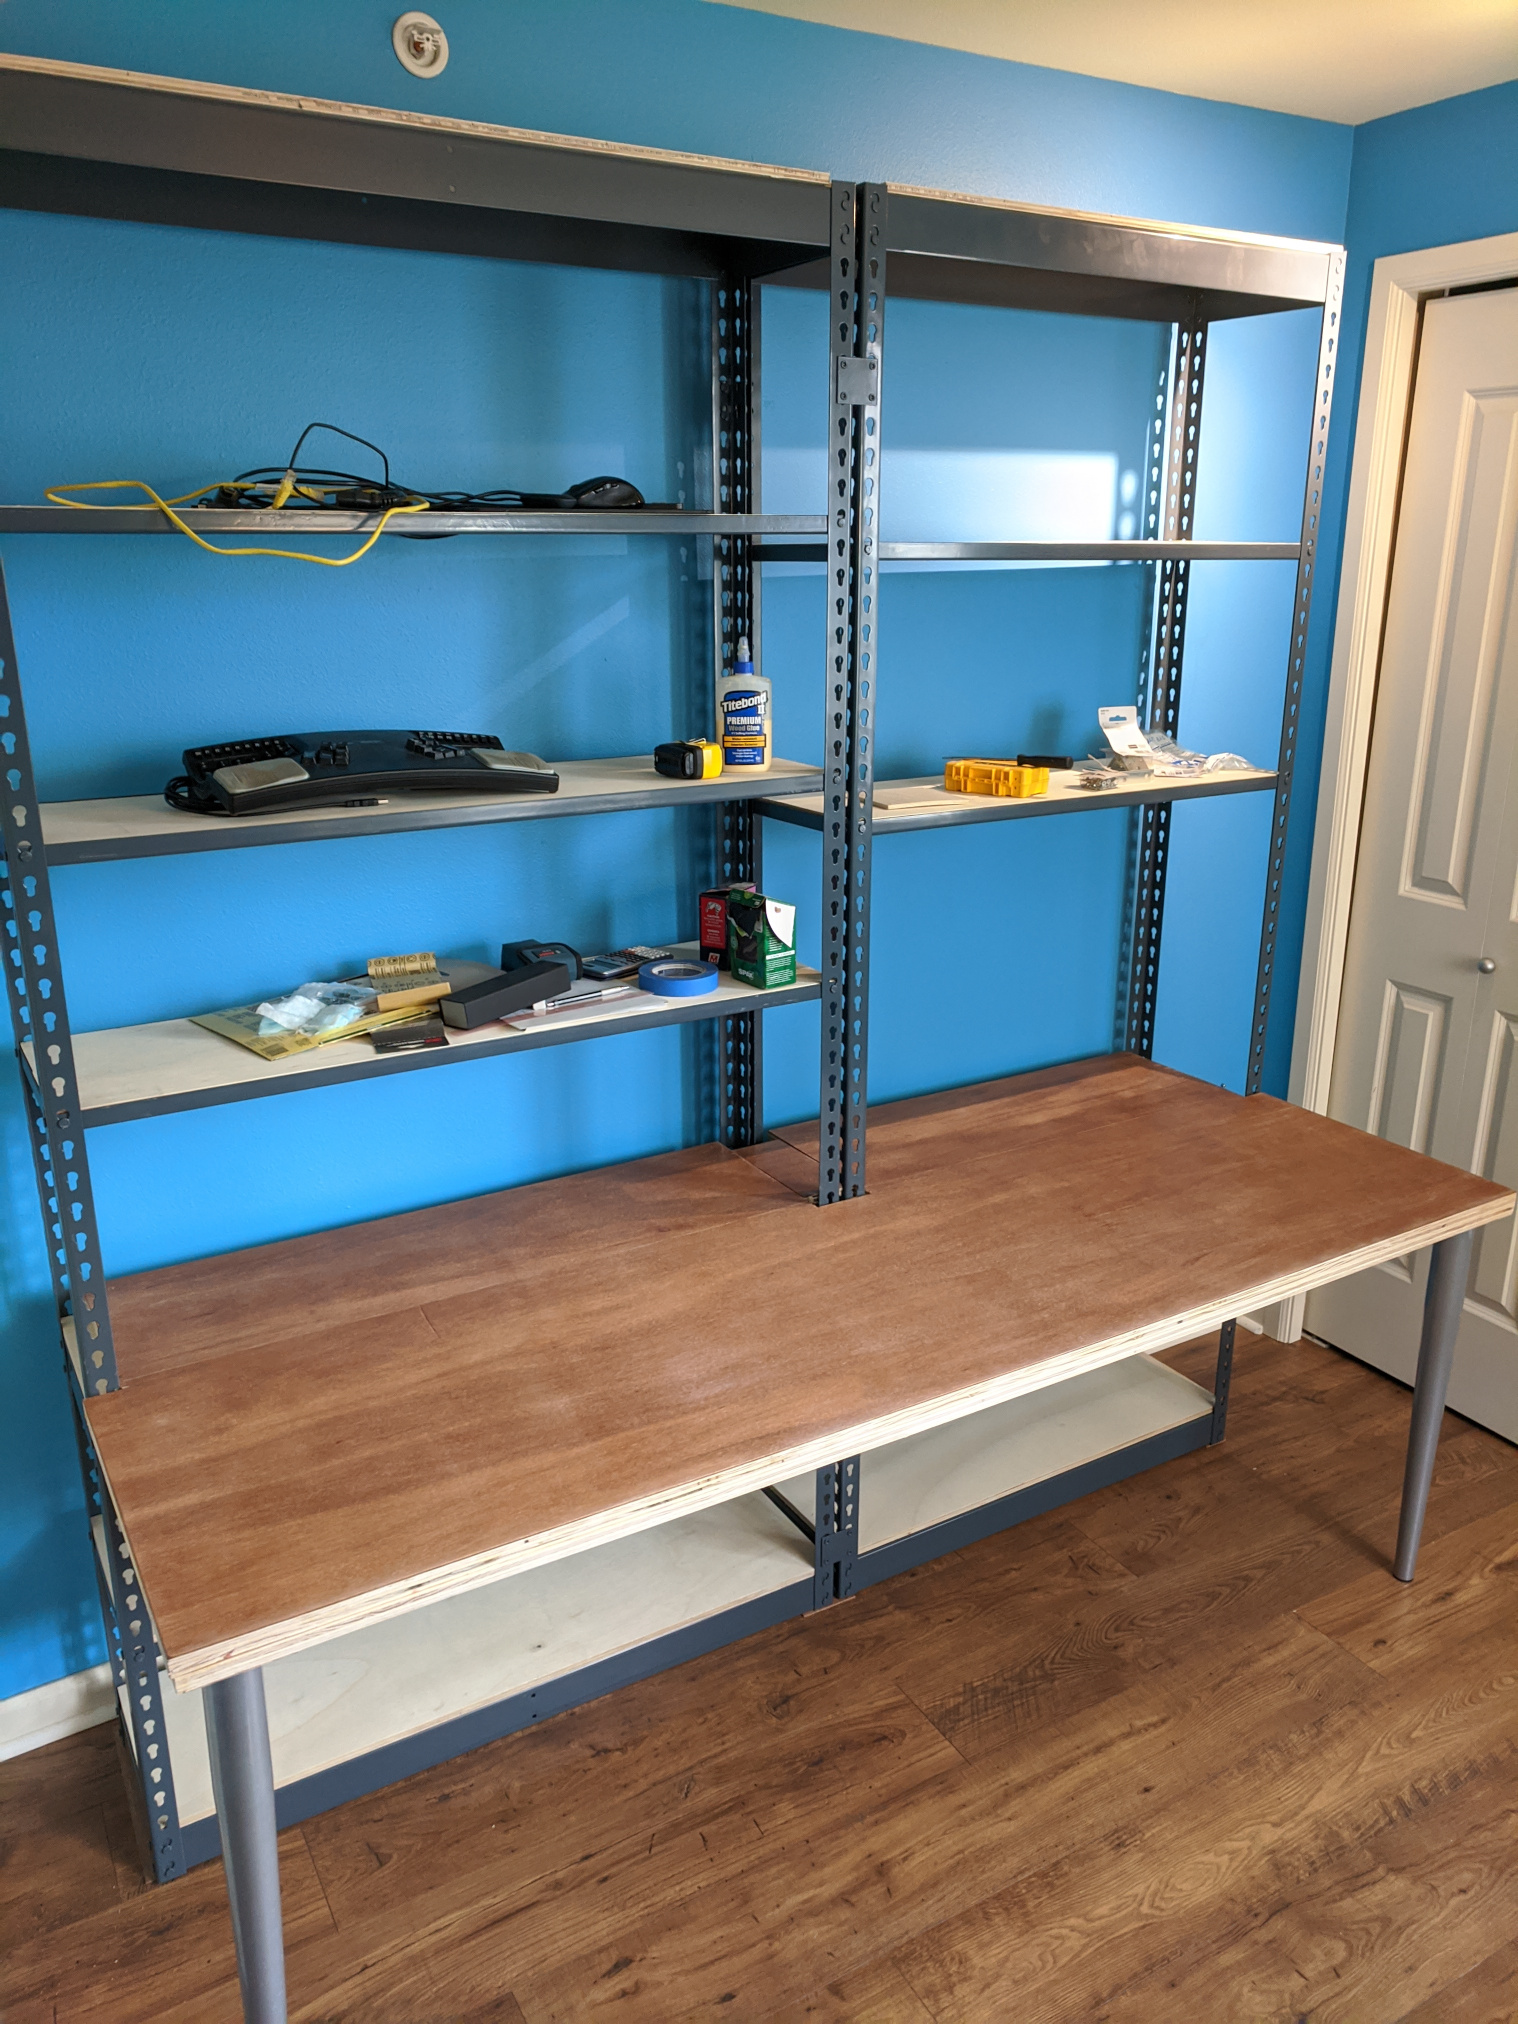 Desk built into the front of two metal rivet shelving units.